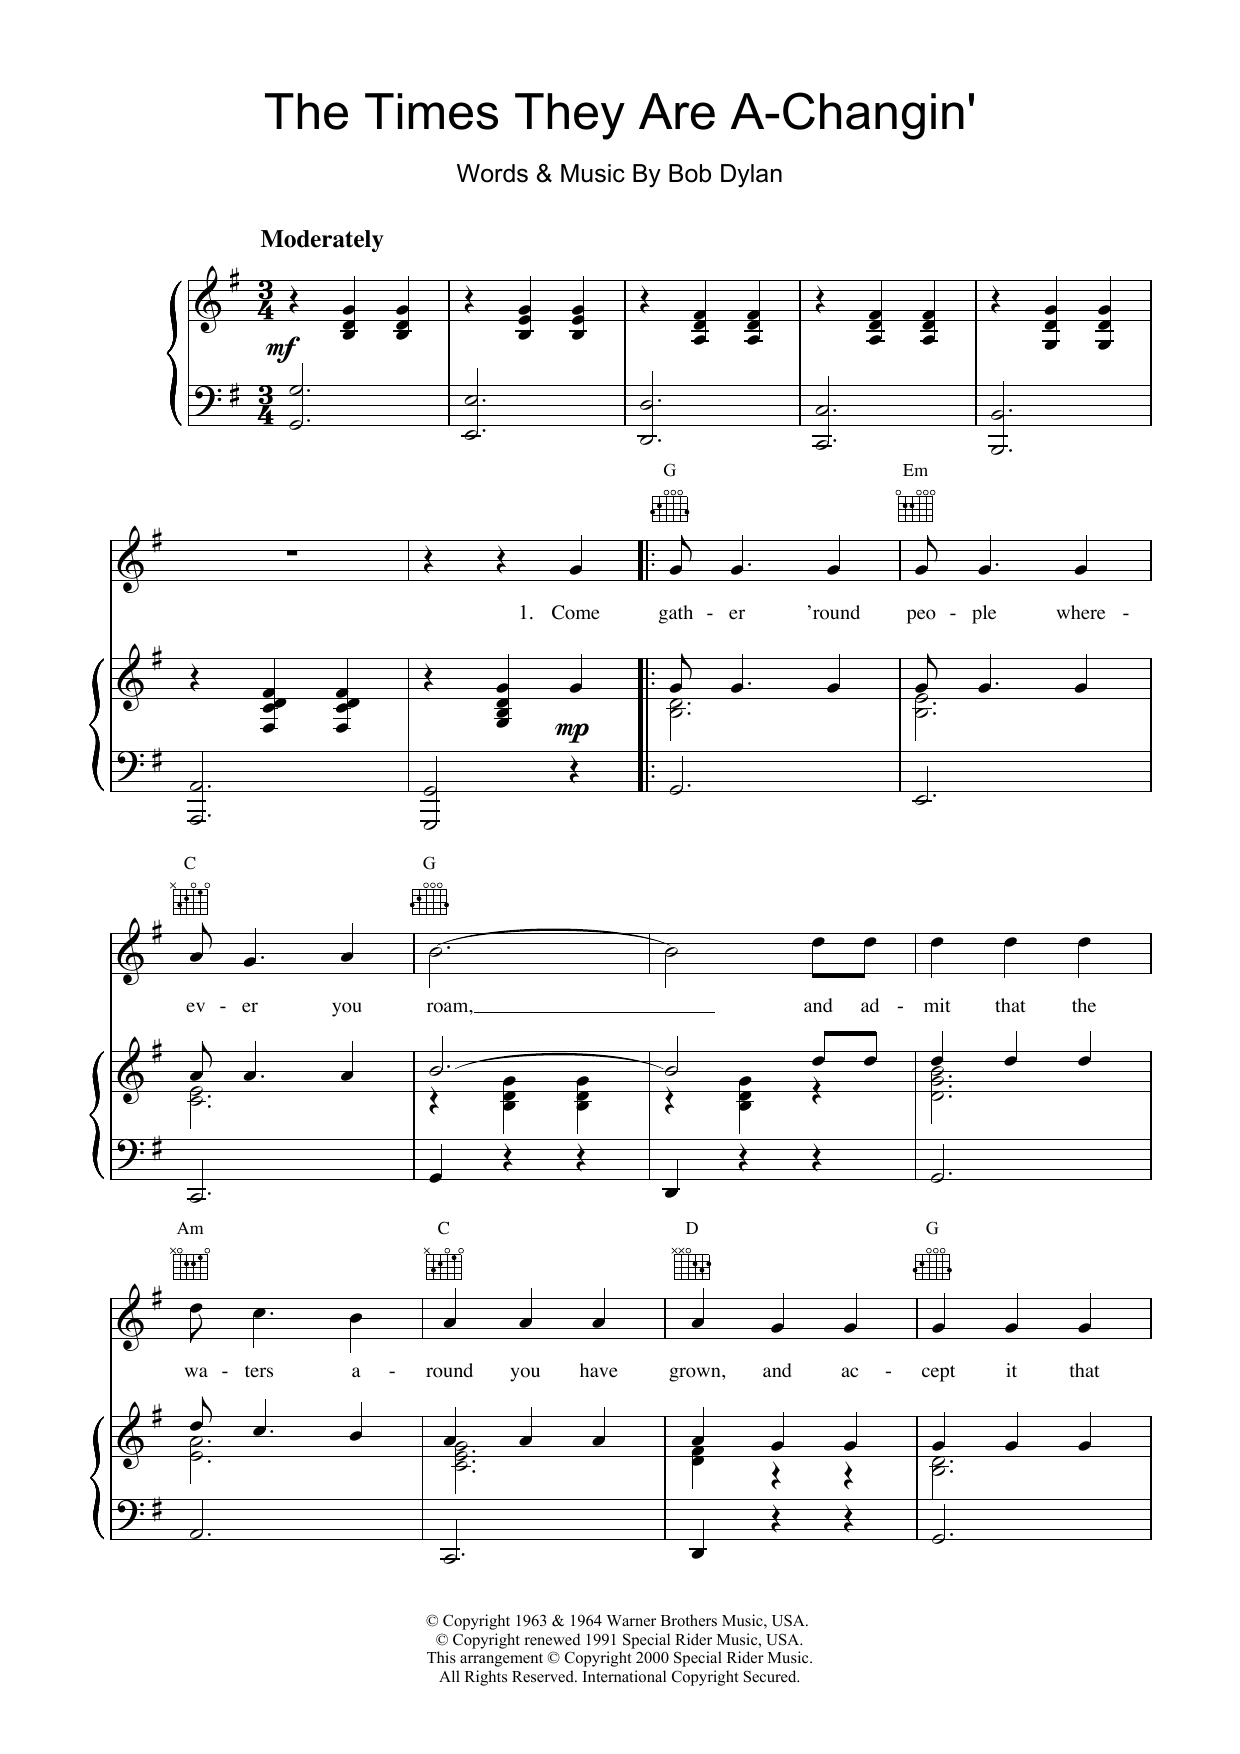 The Times They Are A-Changin' sheet music